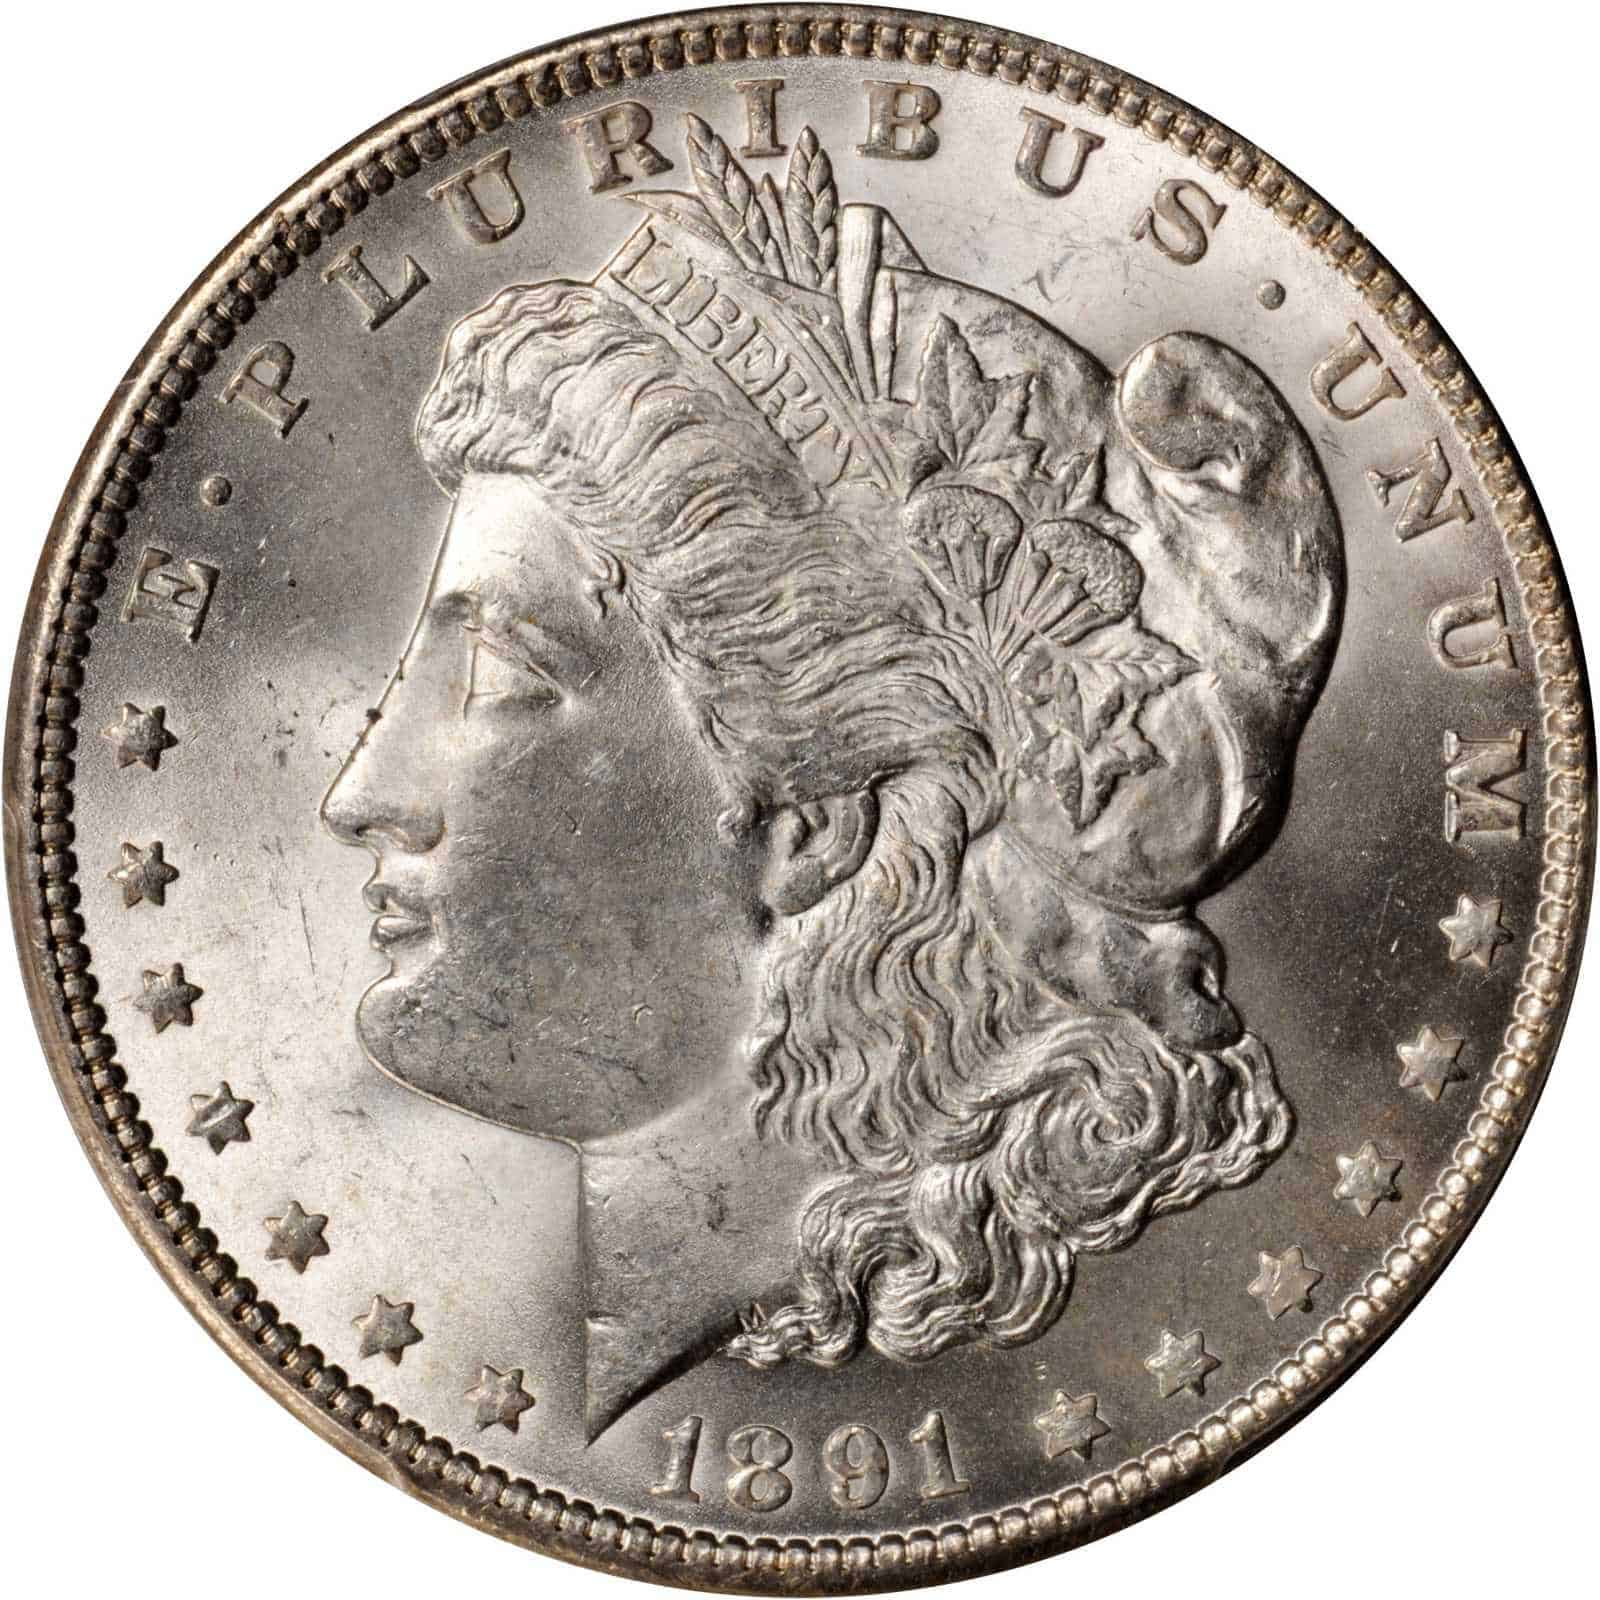 The Obverse of the 1891 Silver Dollar